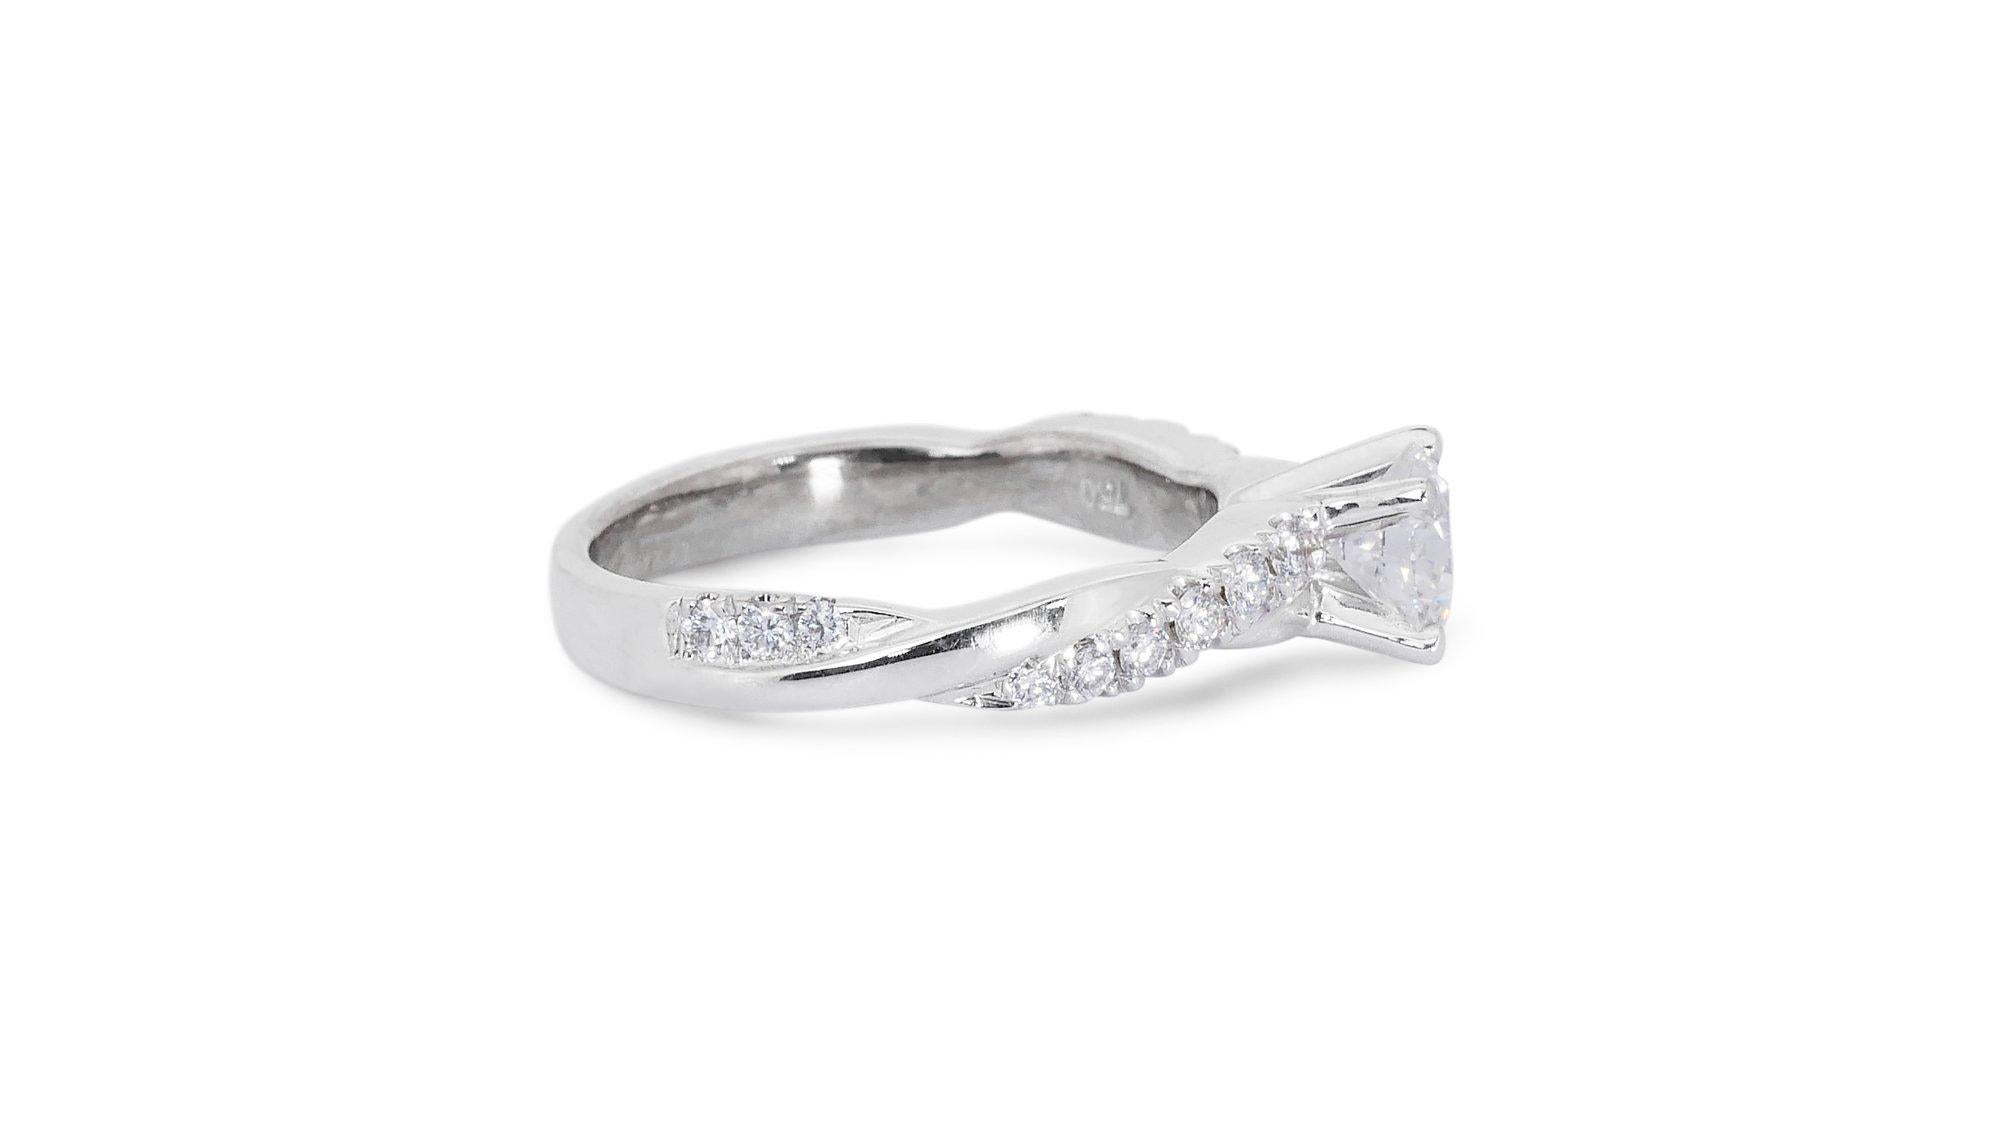 Ravishing 18k White Gold Pave Ring w/ 0.83 ct Natural Diamonds GIA Certificate In New Condition For Sale In רמת גן, IL